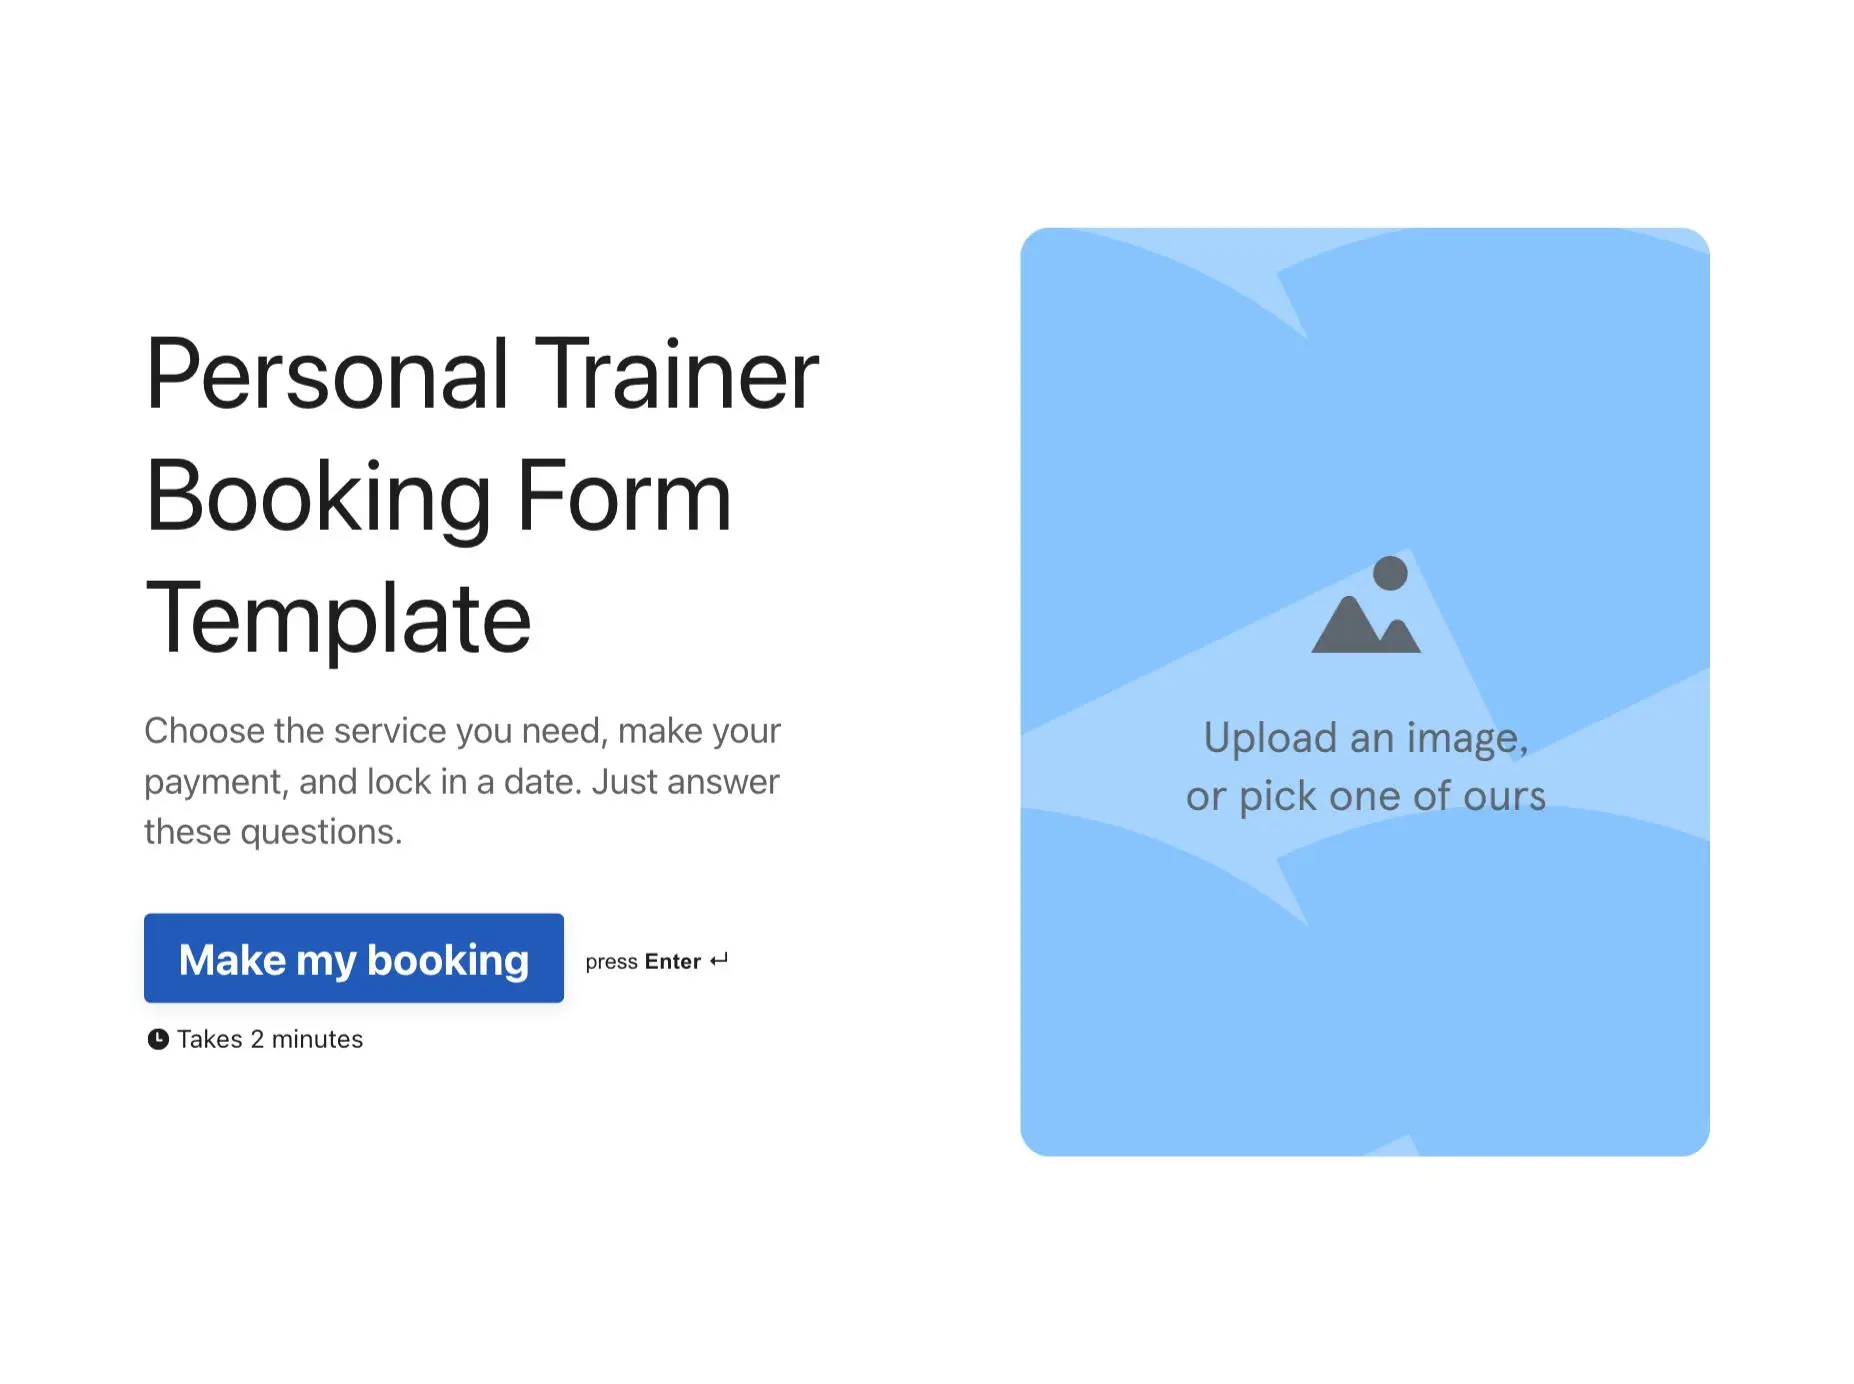 Personal Trainer Booking Form Template Hero